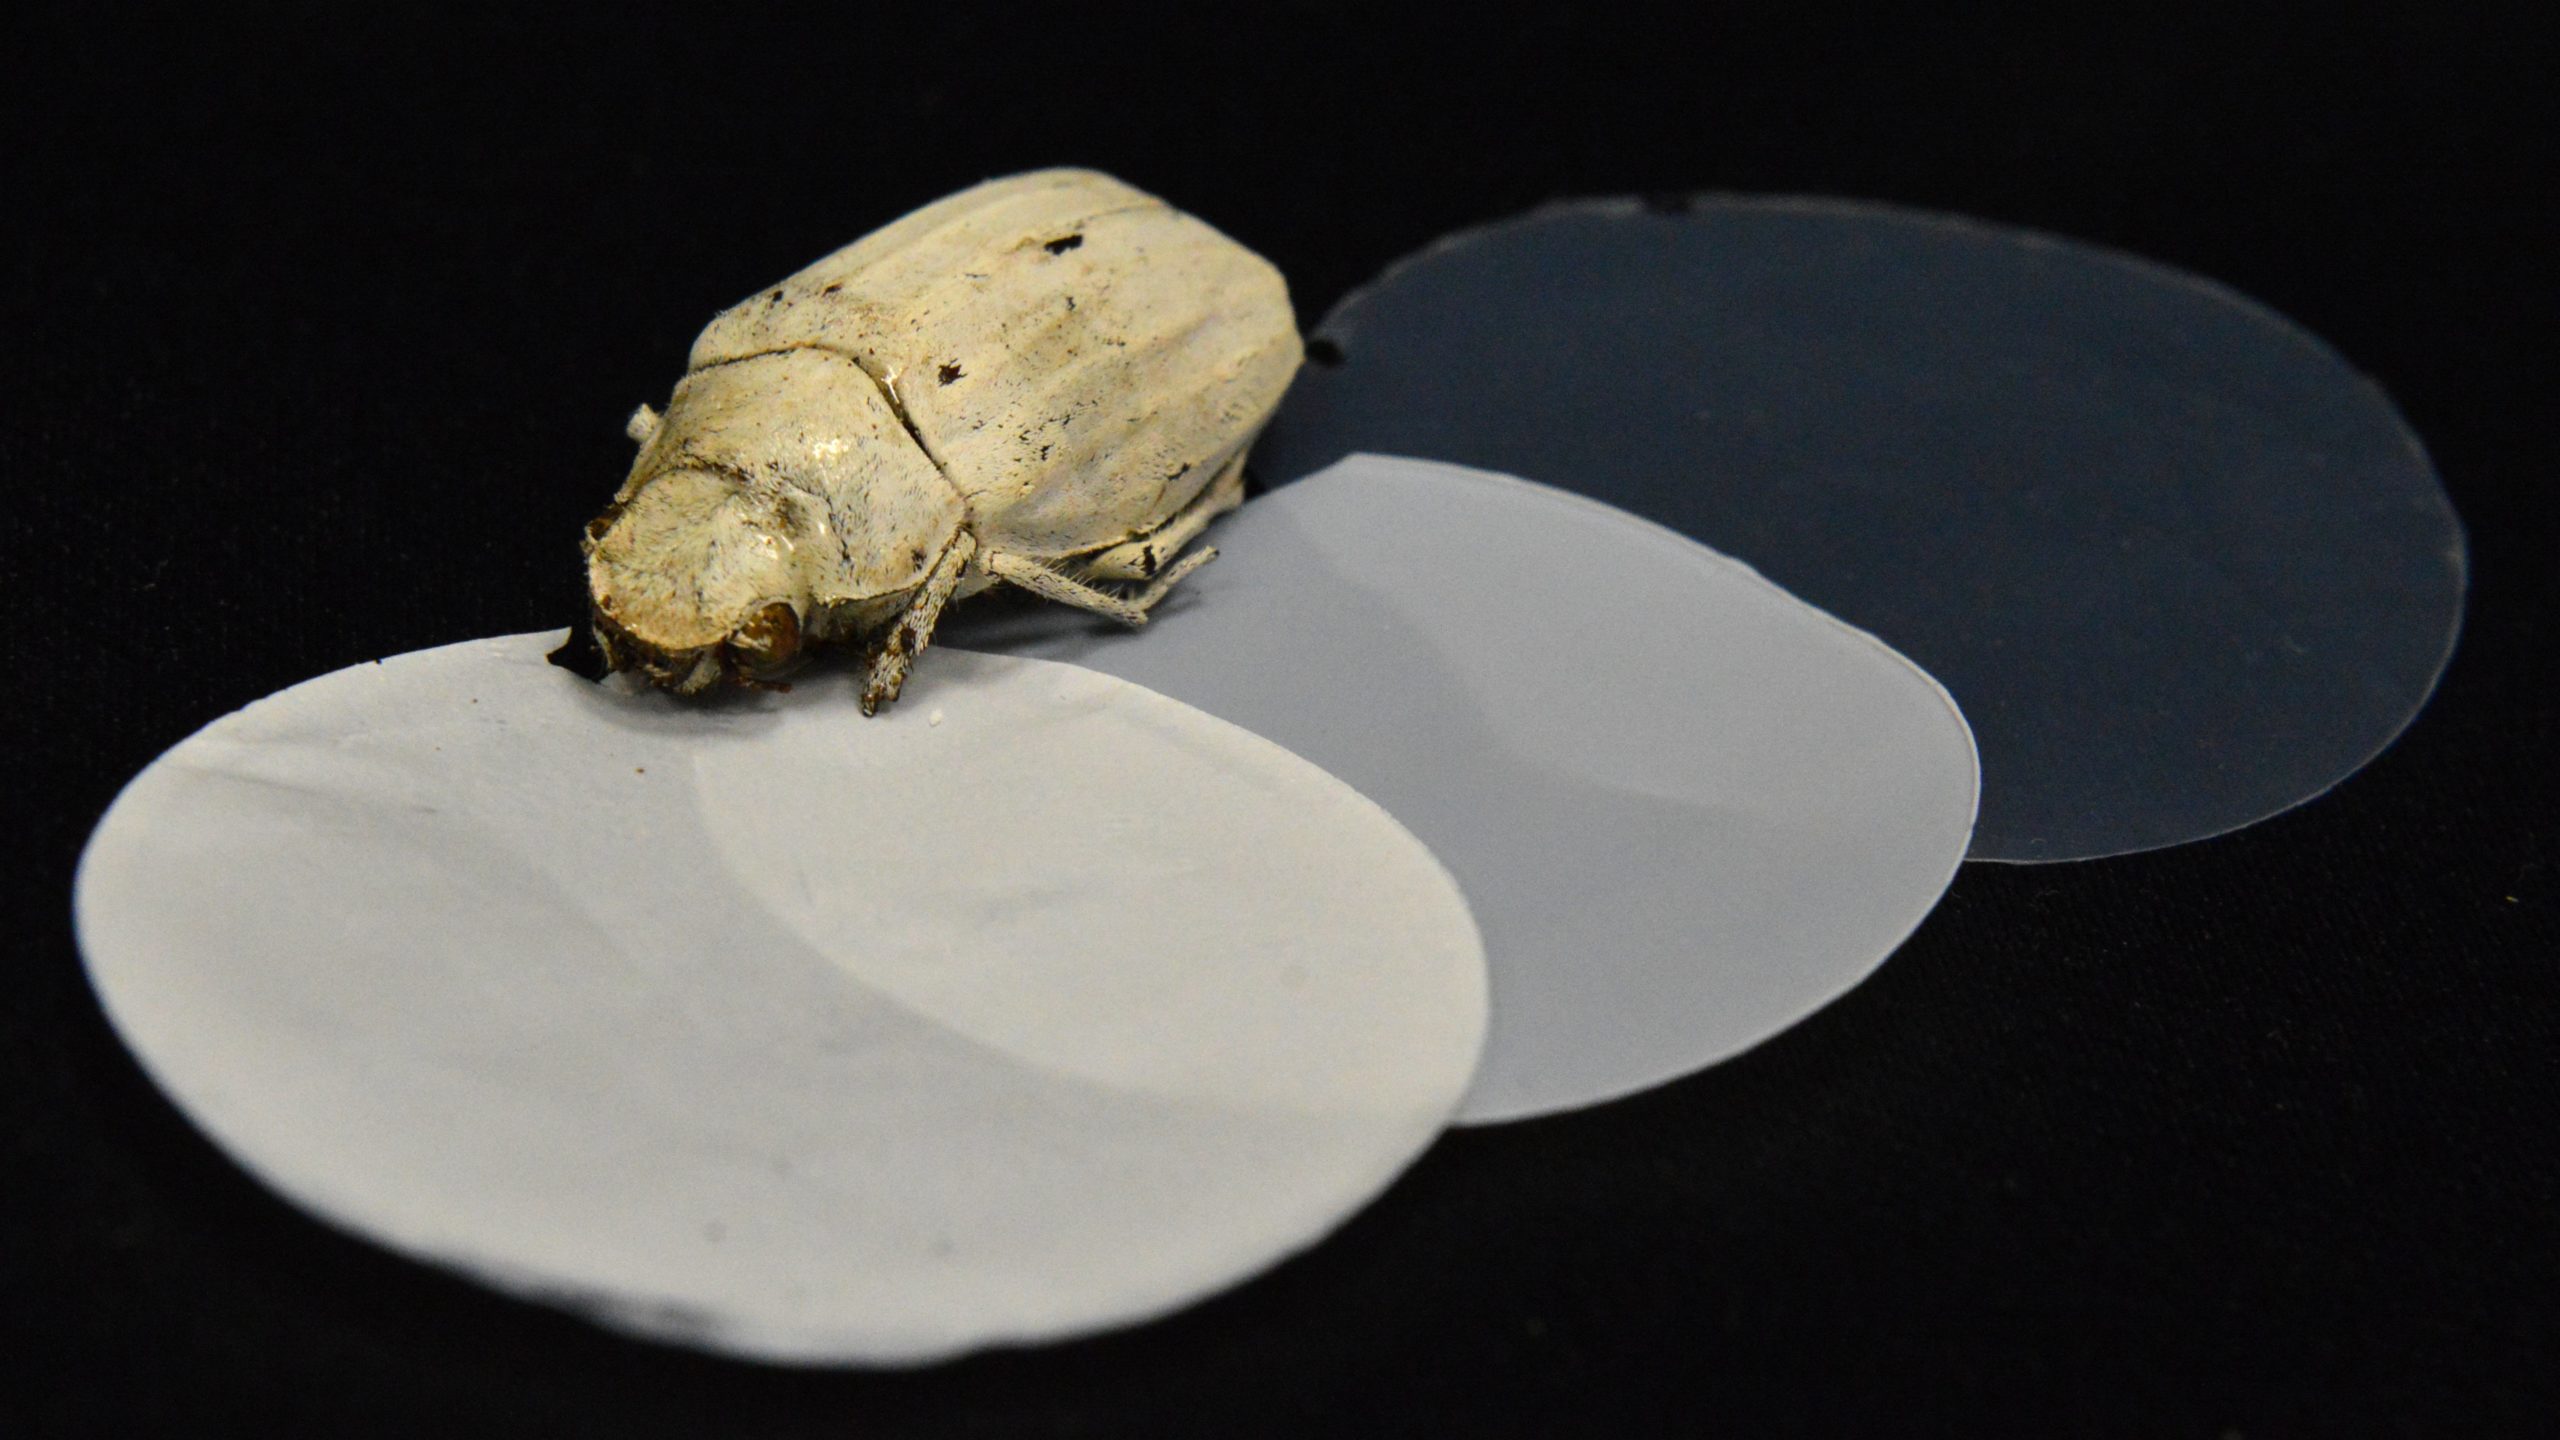 New Super-White Material Inspired By Eerily White Beetle